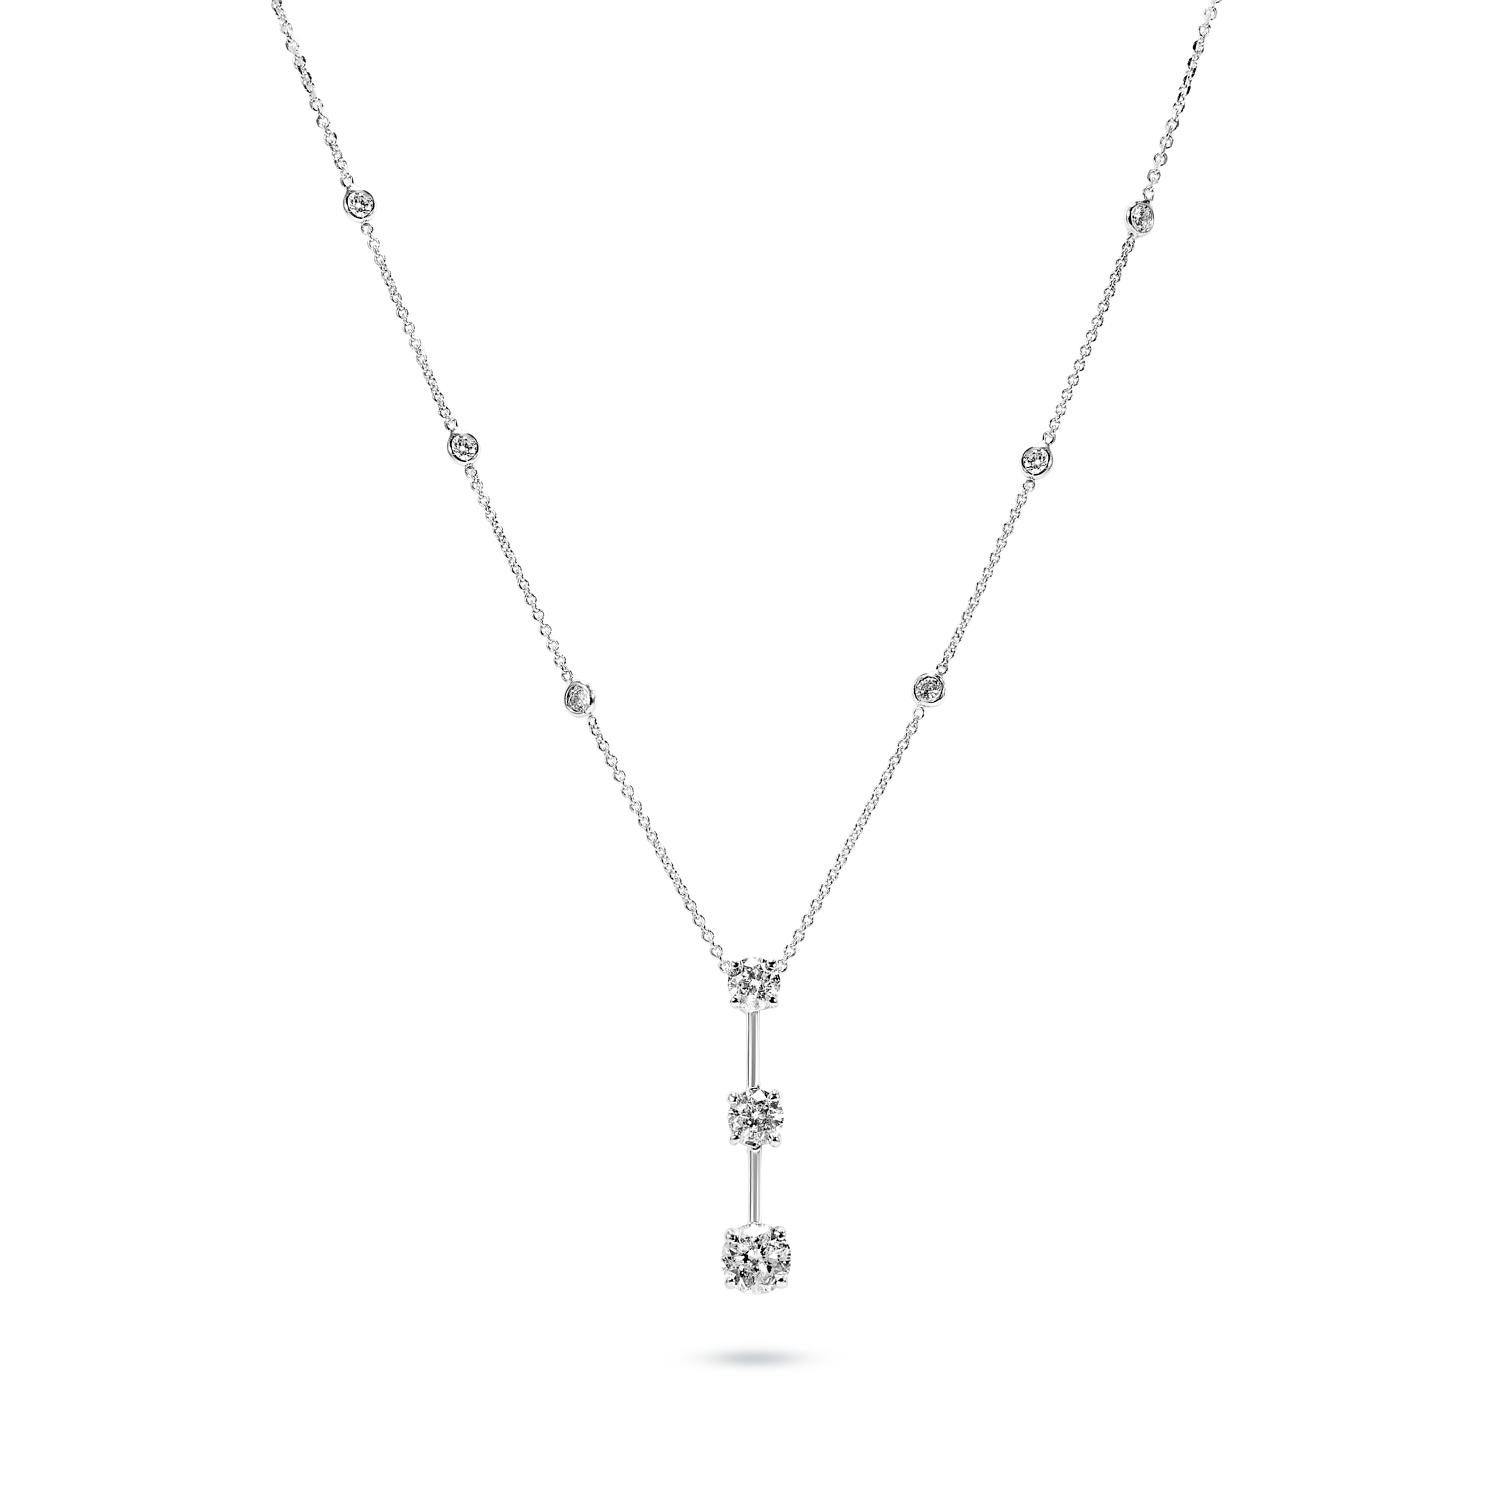 Indie 1.5 Carats Round Brilliant Past Present Future 3 Stone Diamond Necklace in White Gold 

Earth Mined Diamond Station Necklace:

Setting: Bezel Set & Three Stone
Carat Weight: 1.5 Carats
Style: Round Brilliant Cut
Chains: 14k White Gold